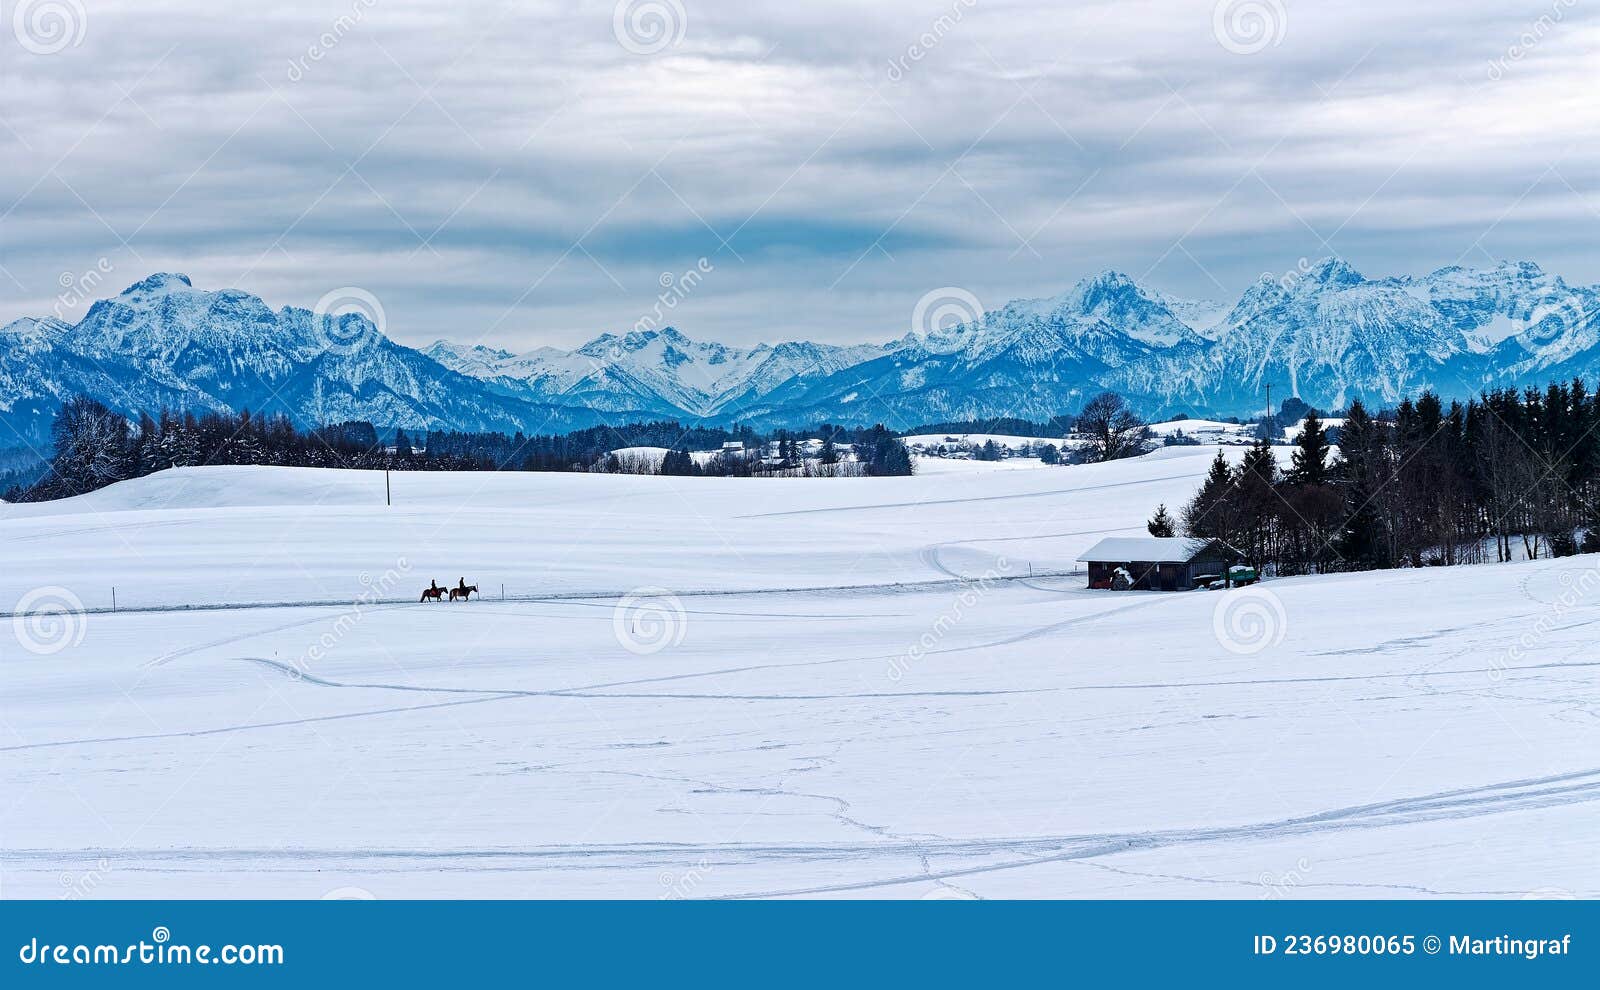 panoramic view over snowy pre-alpine landscape with two riders on horses